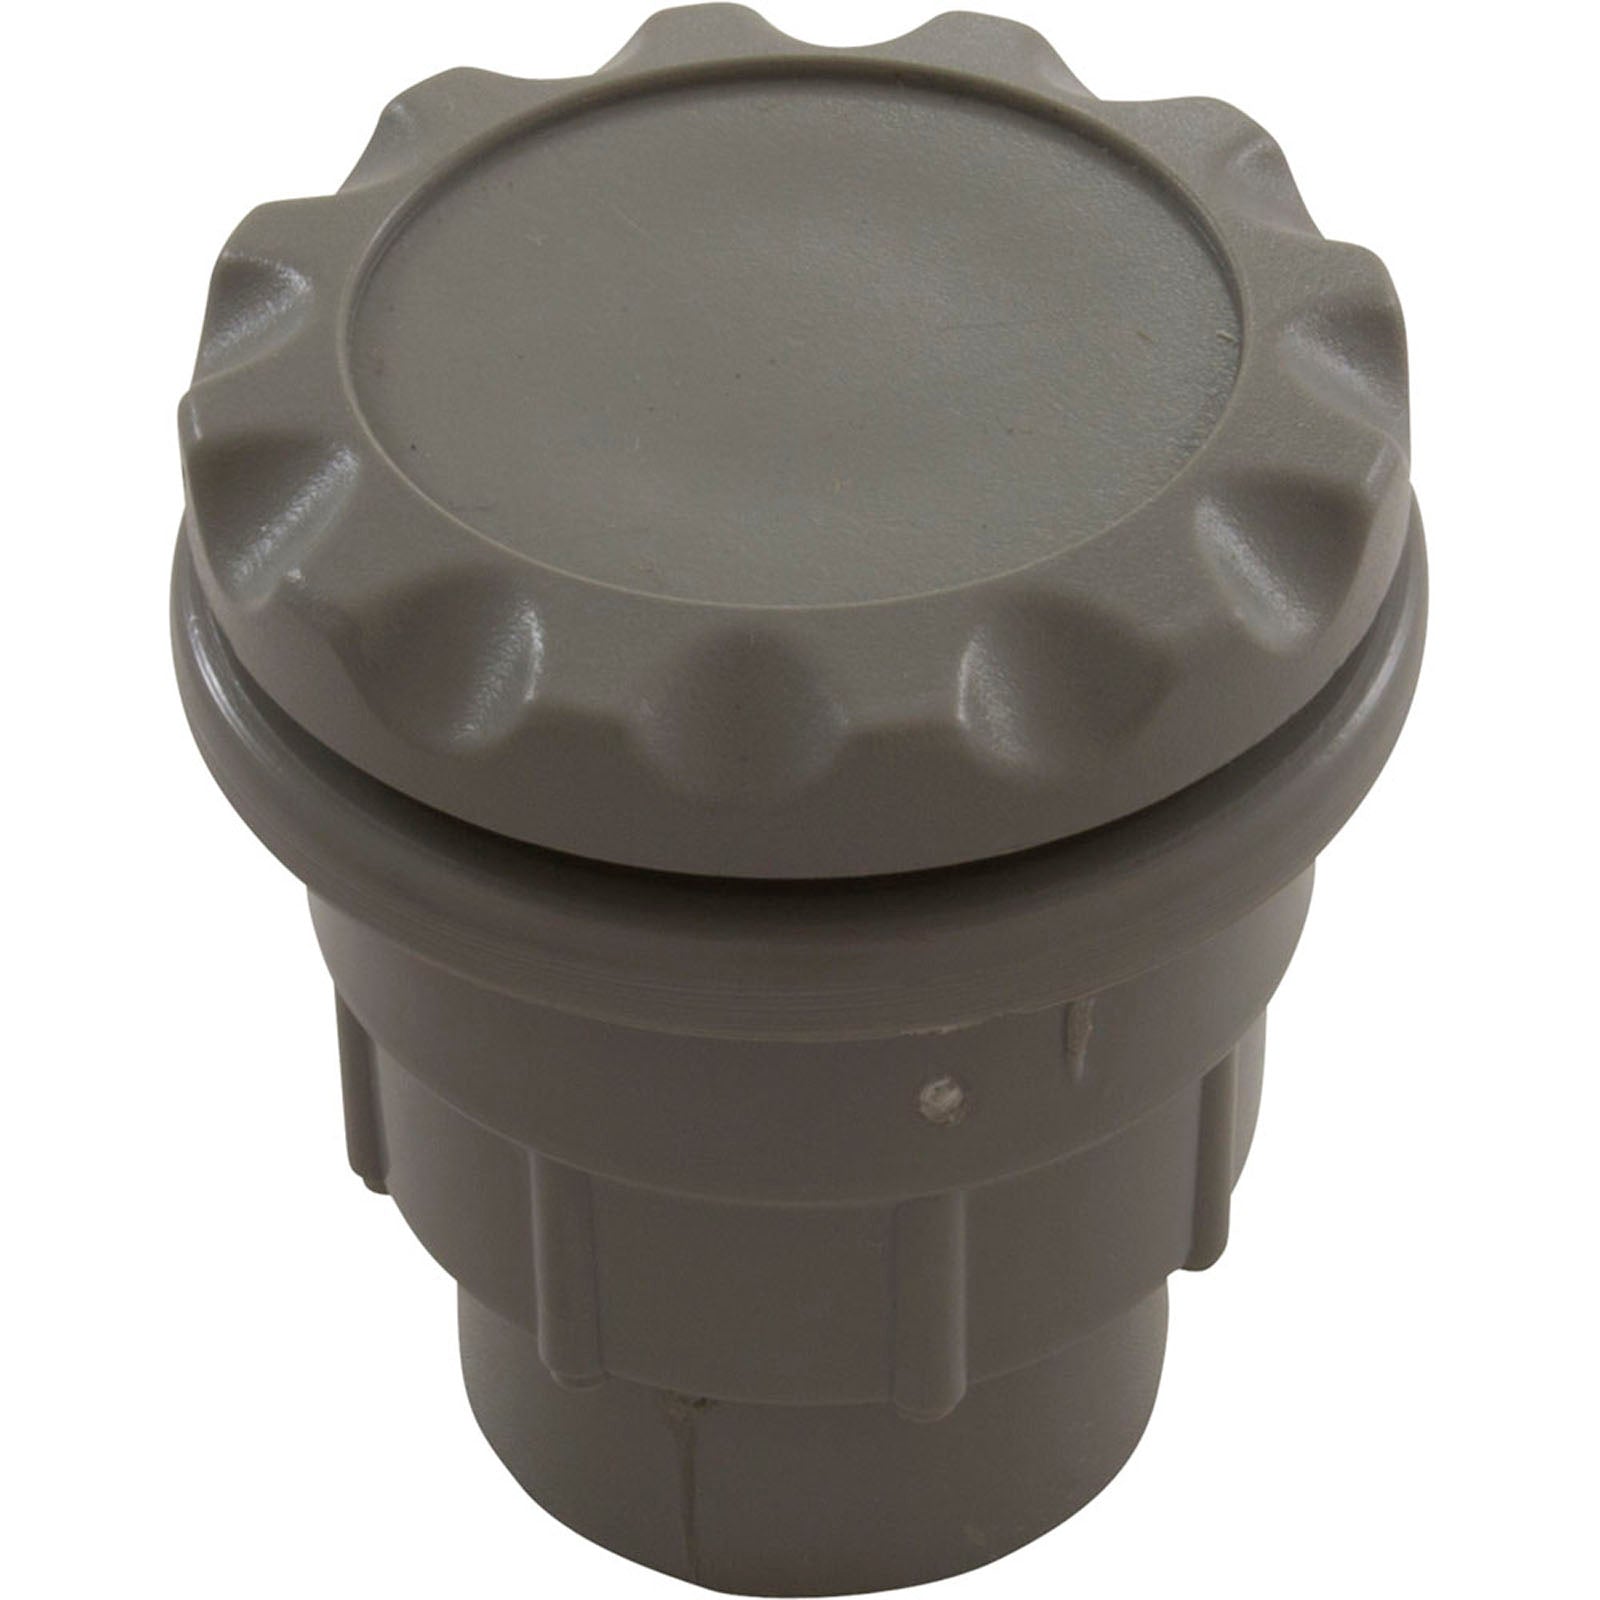 Waterway Gunite Air Control "A" Style (Fits Inside 1.5" Pipe Or 1/2" Slip) [Gray] (660-3407)